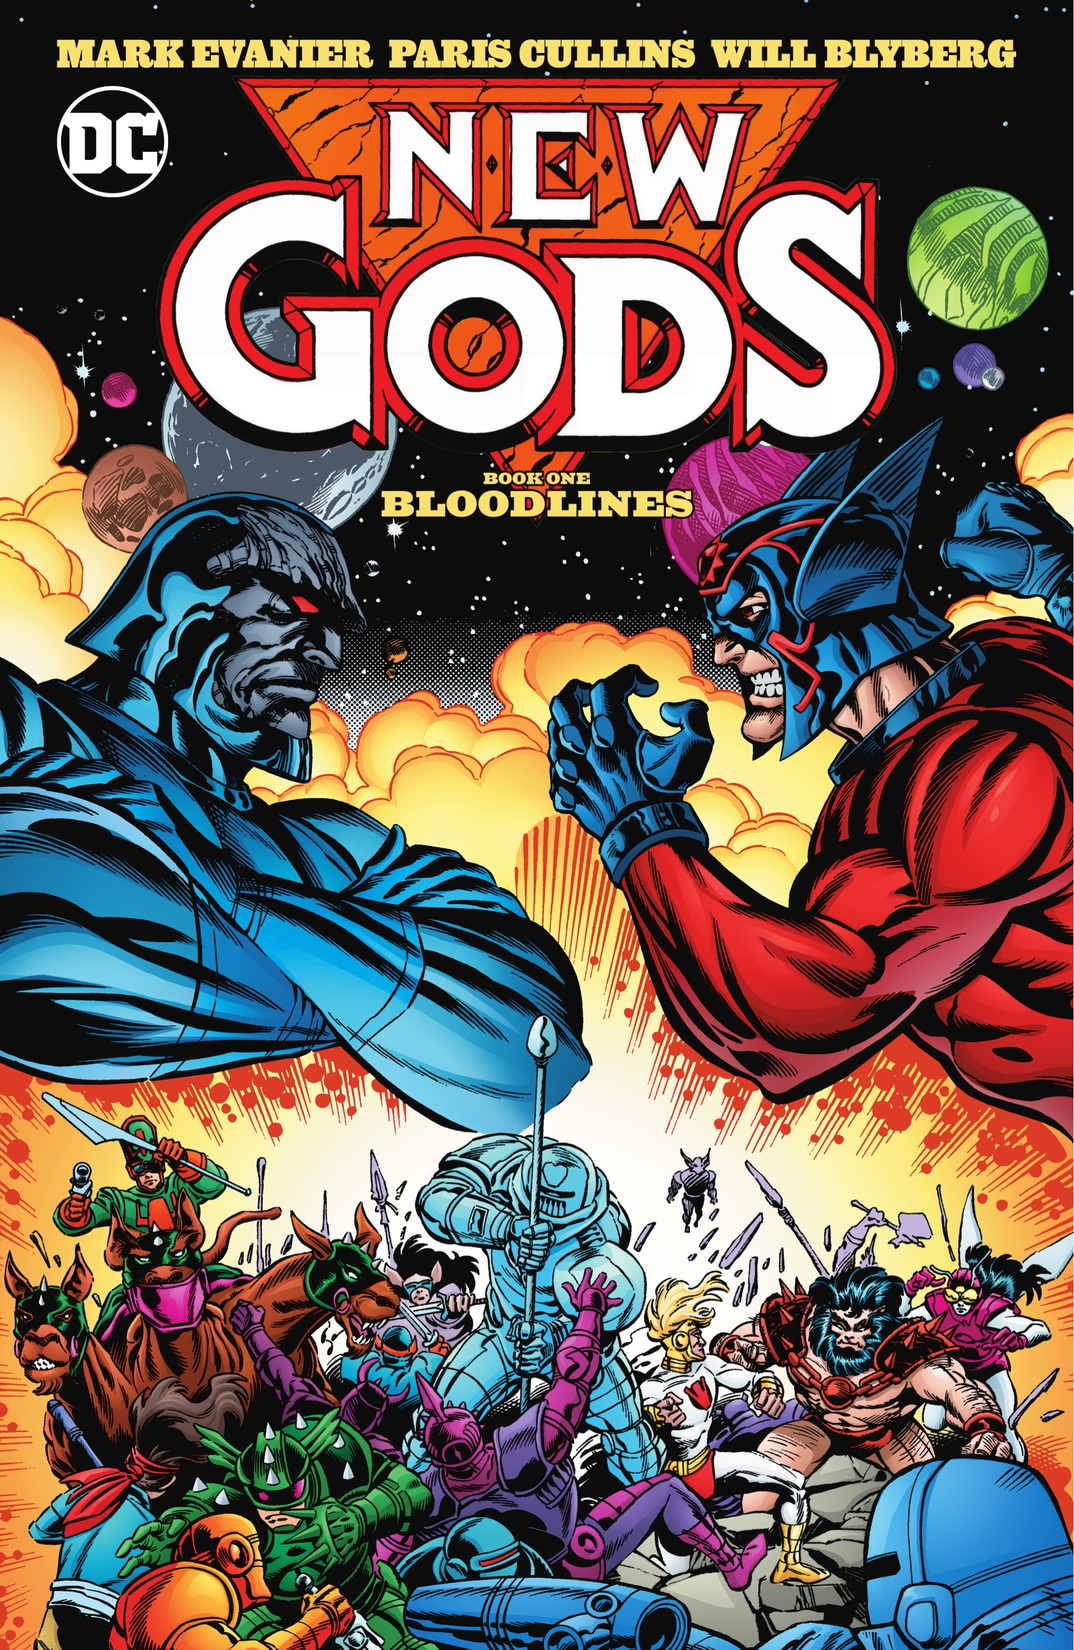 New Gods Book One: Bloodlines preview images